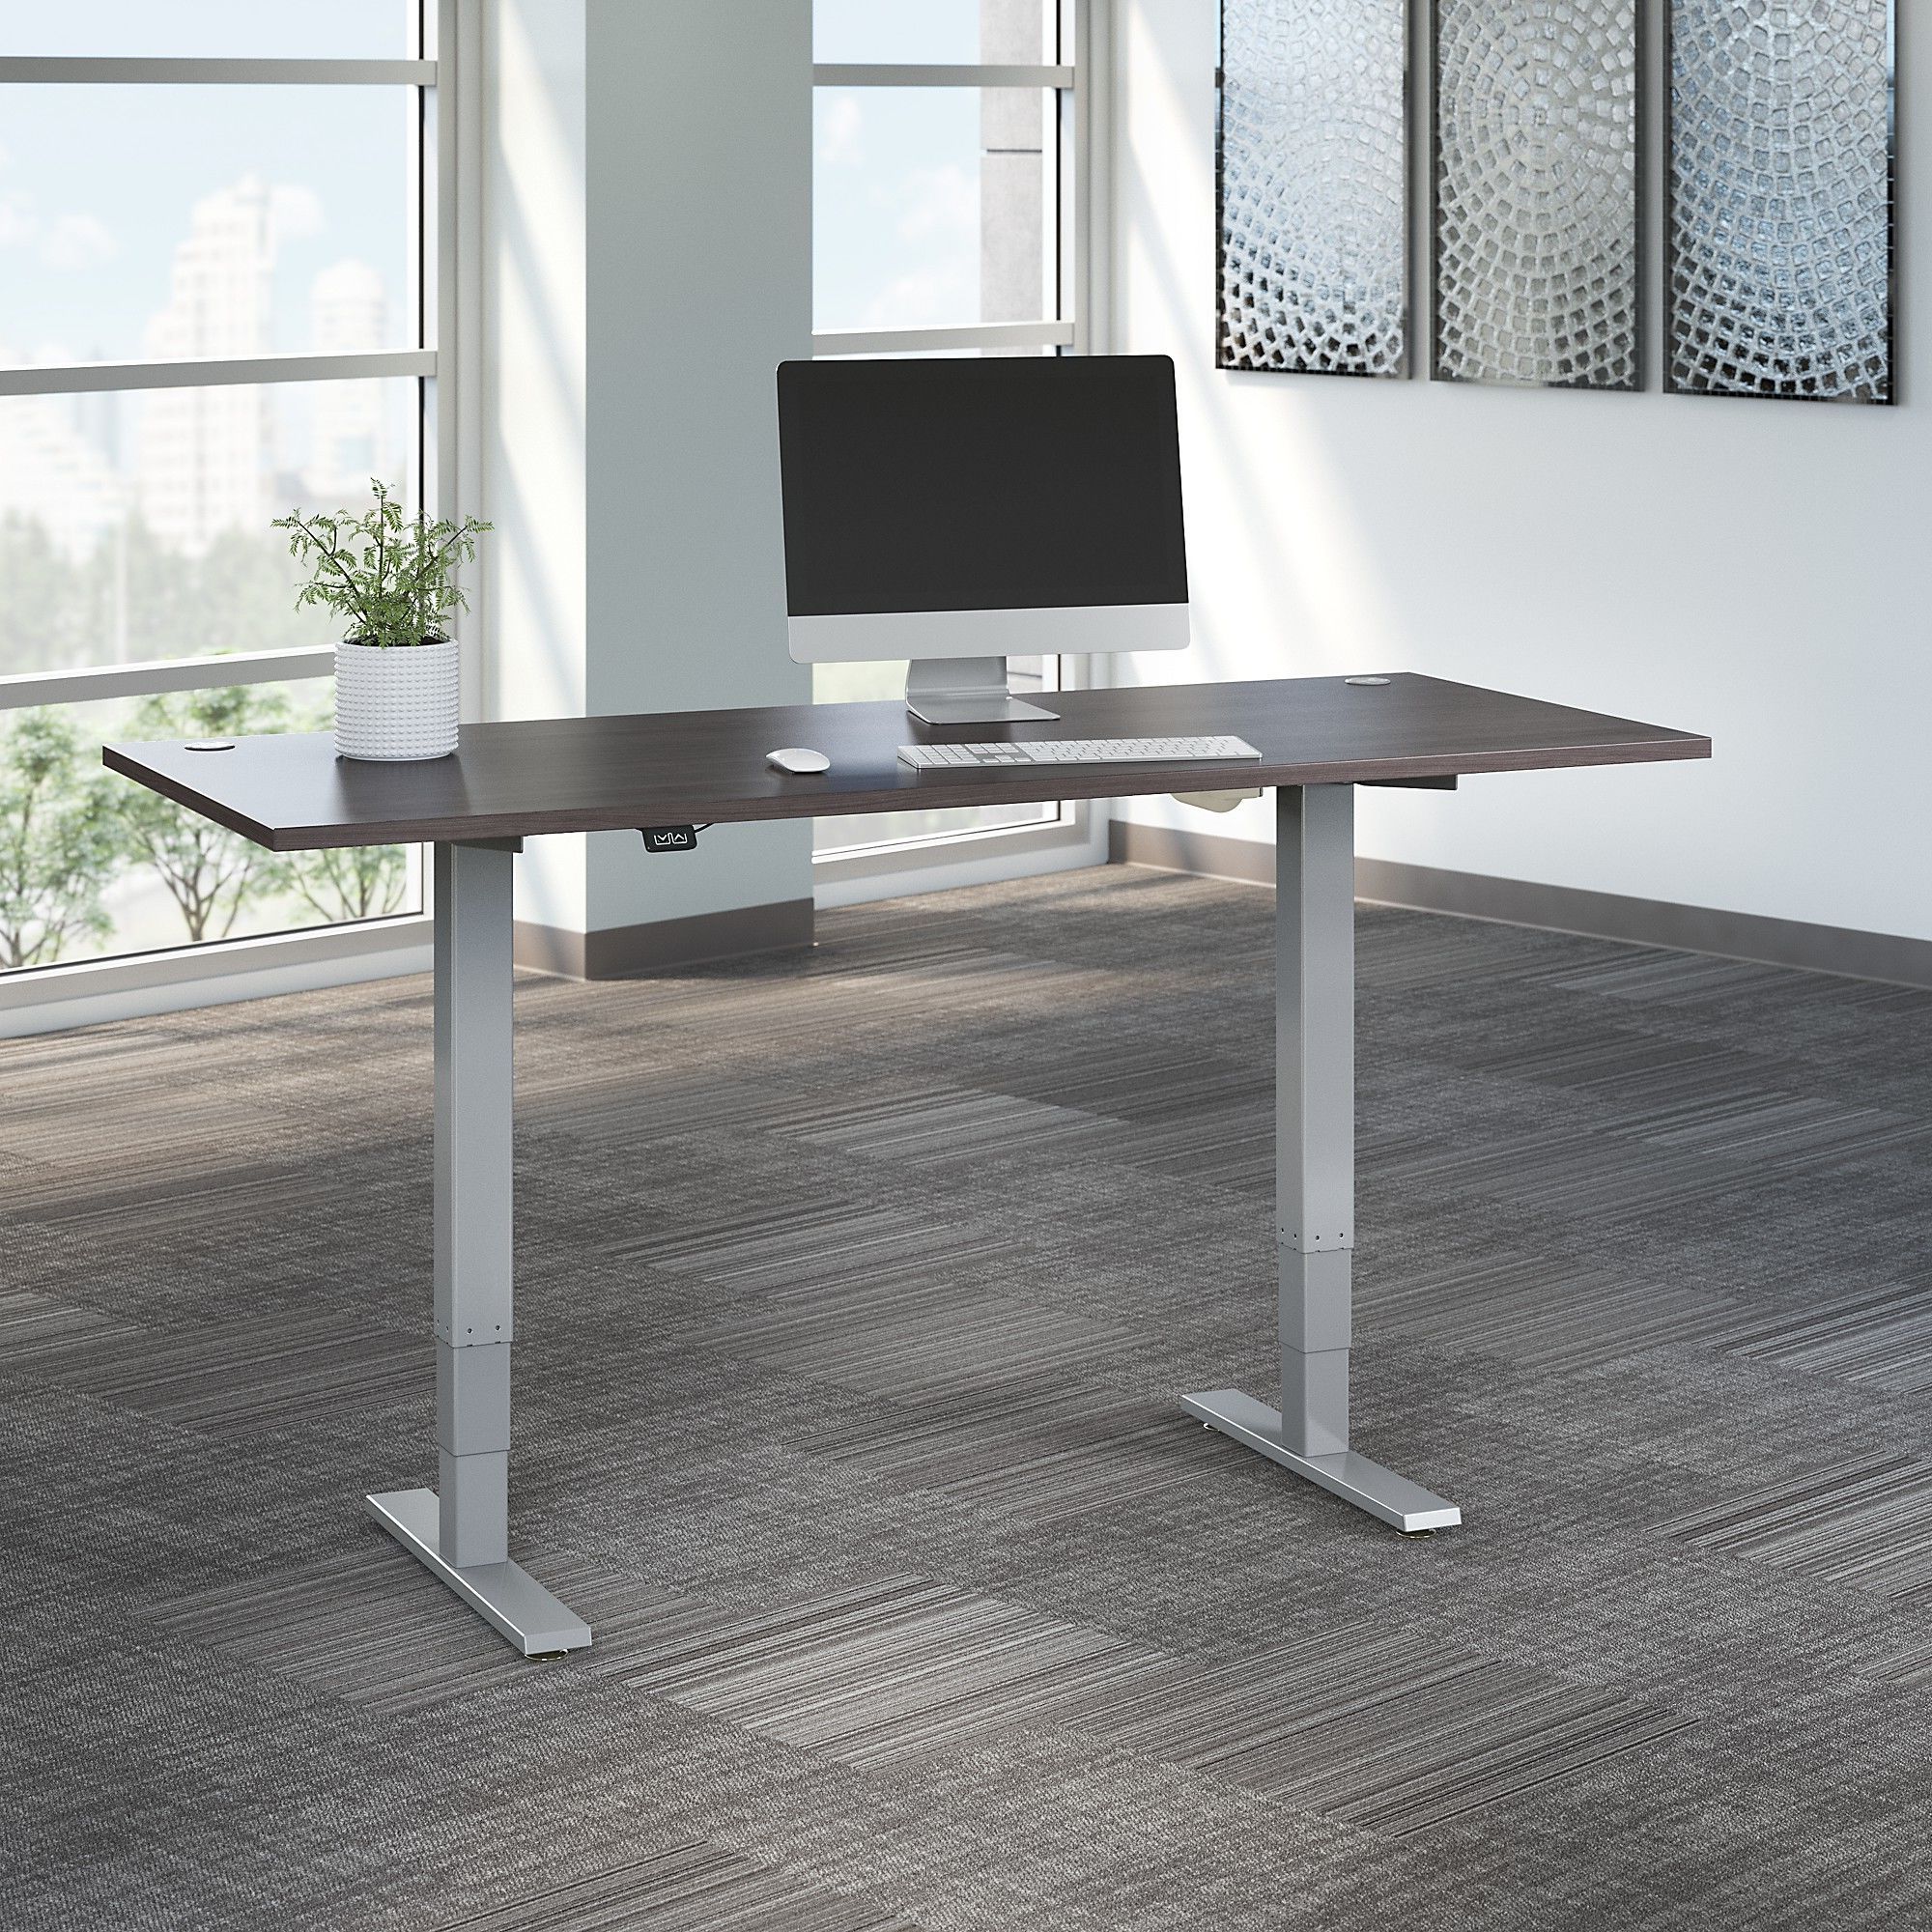 Well Known 72w X 30d Electric Height Adjustable Standing Desk In Storm Gray Regarding Espresso Adjustable Stand Up Desks (View 4 of 15)